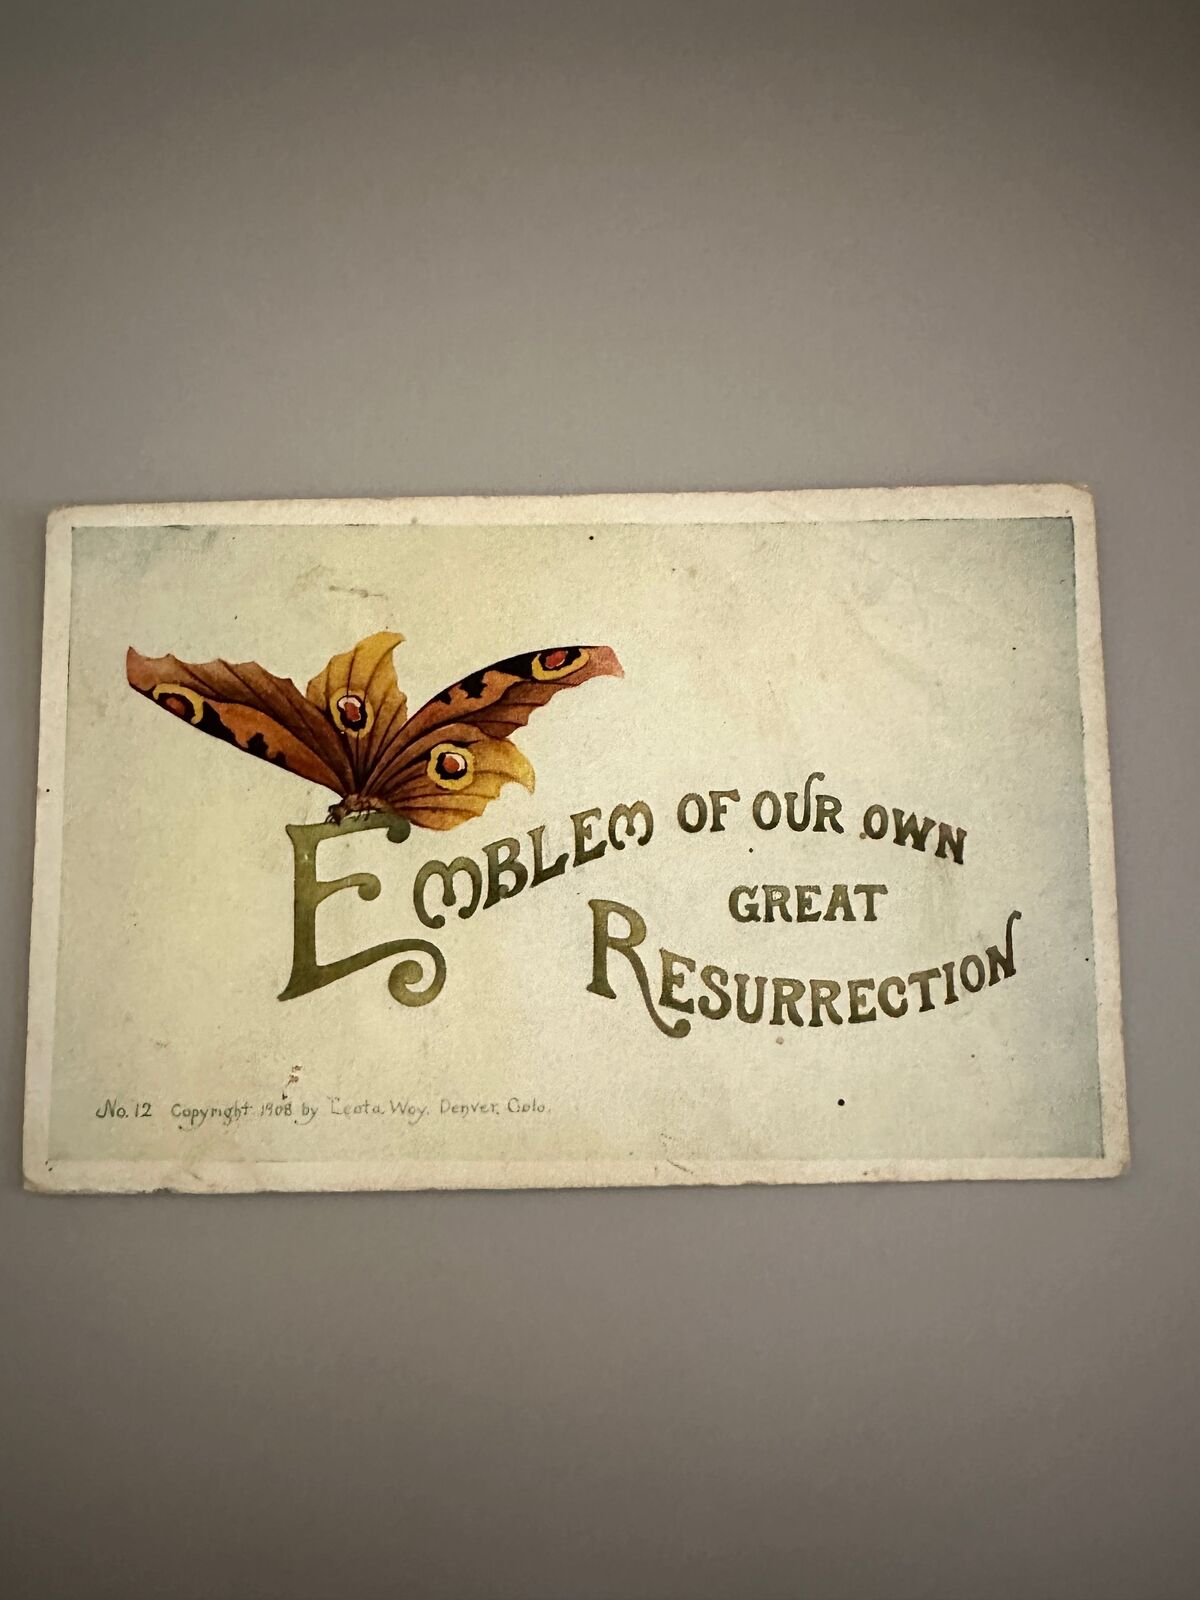 Antique Early 1900’s Postcard - Emblem of our Great Resurrection Butterfly